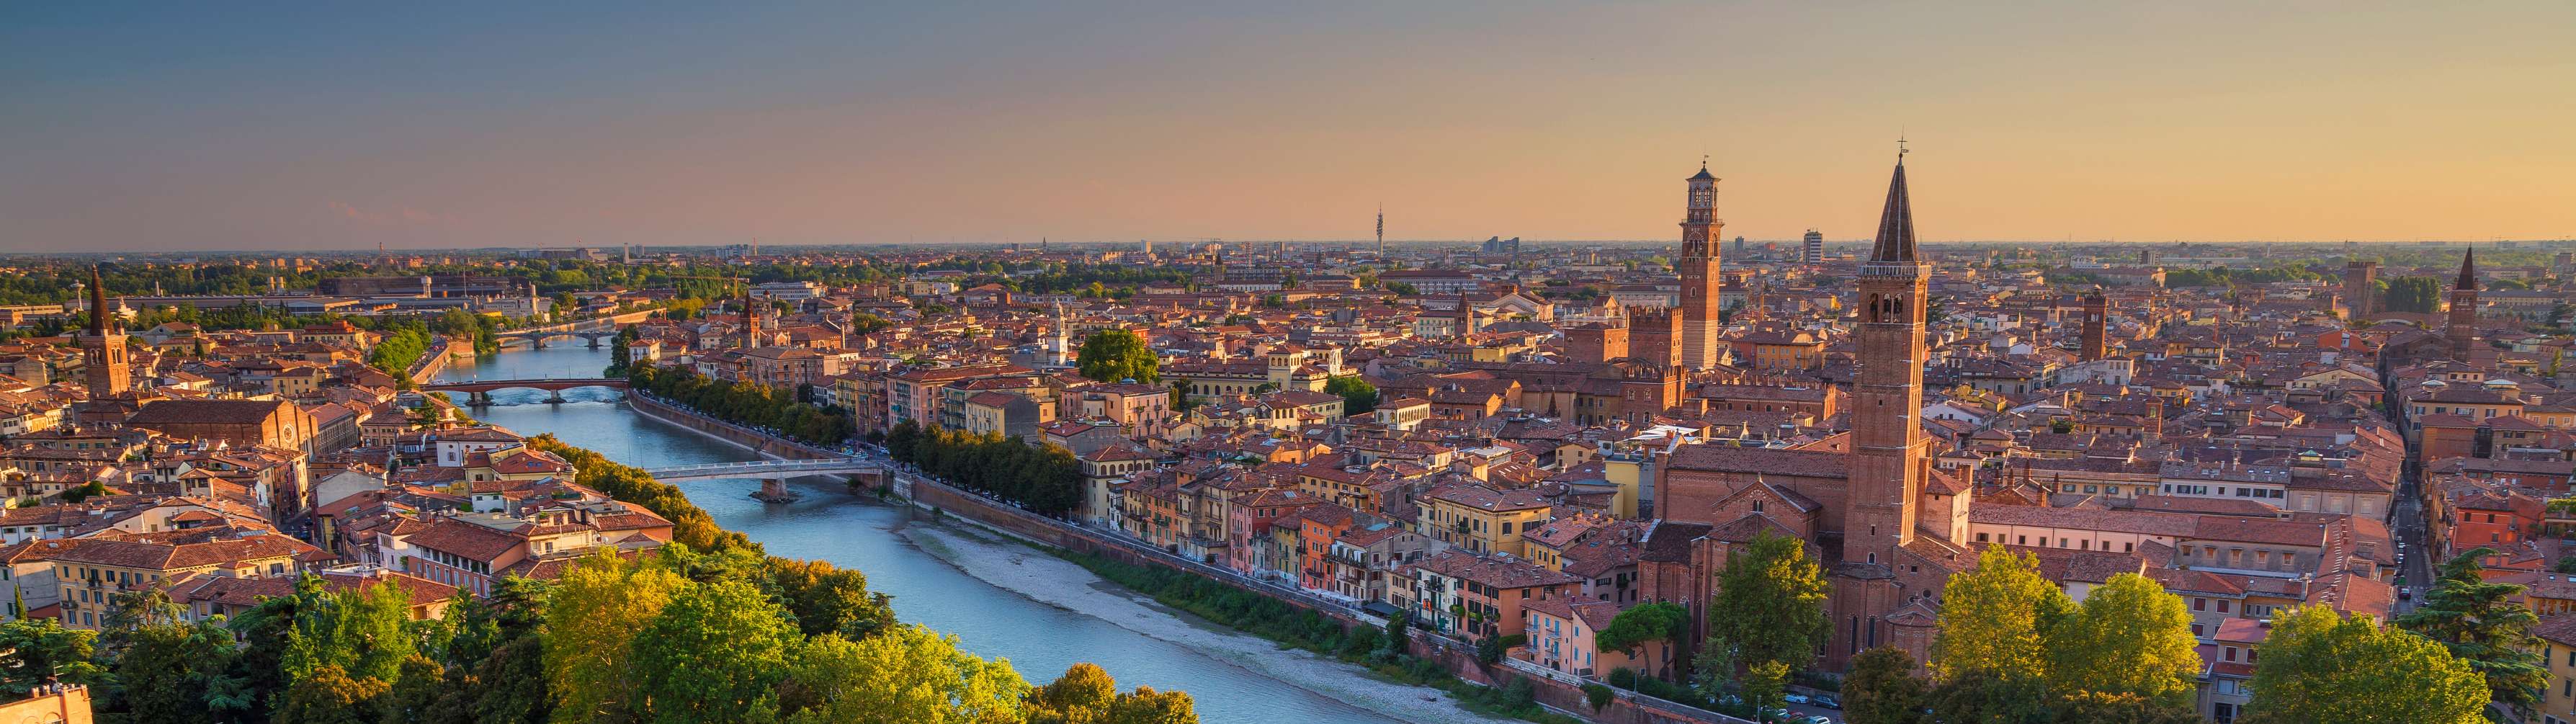 The beautiful city of Verona stretched out in the light of dusk or dawn.